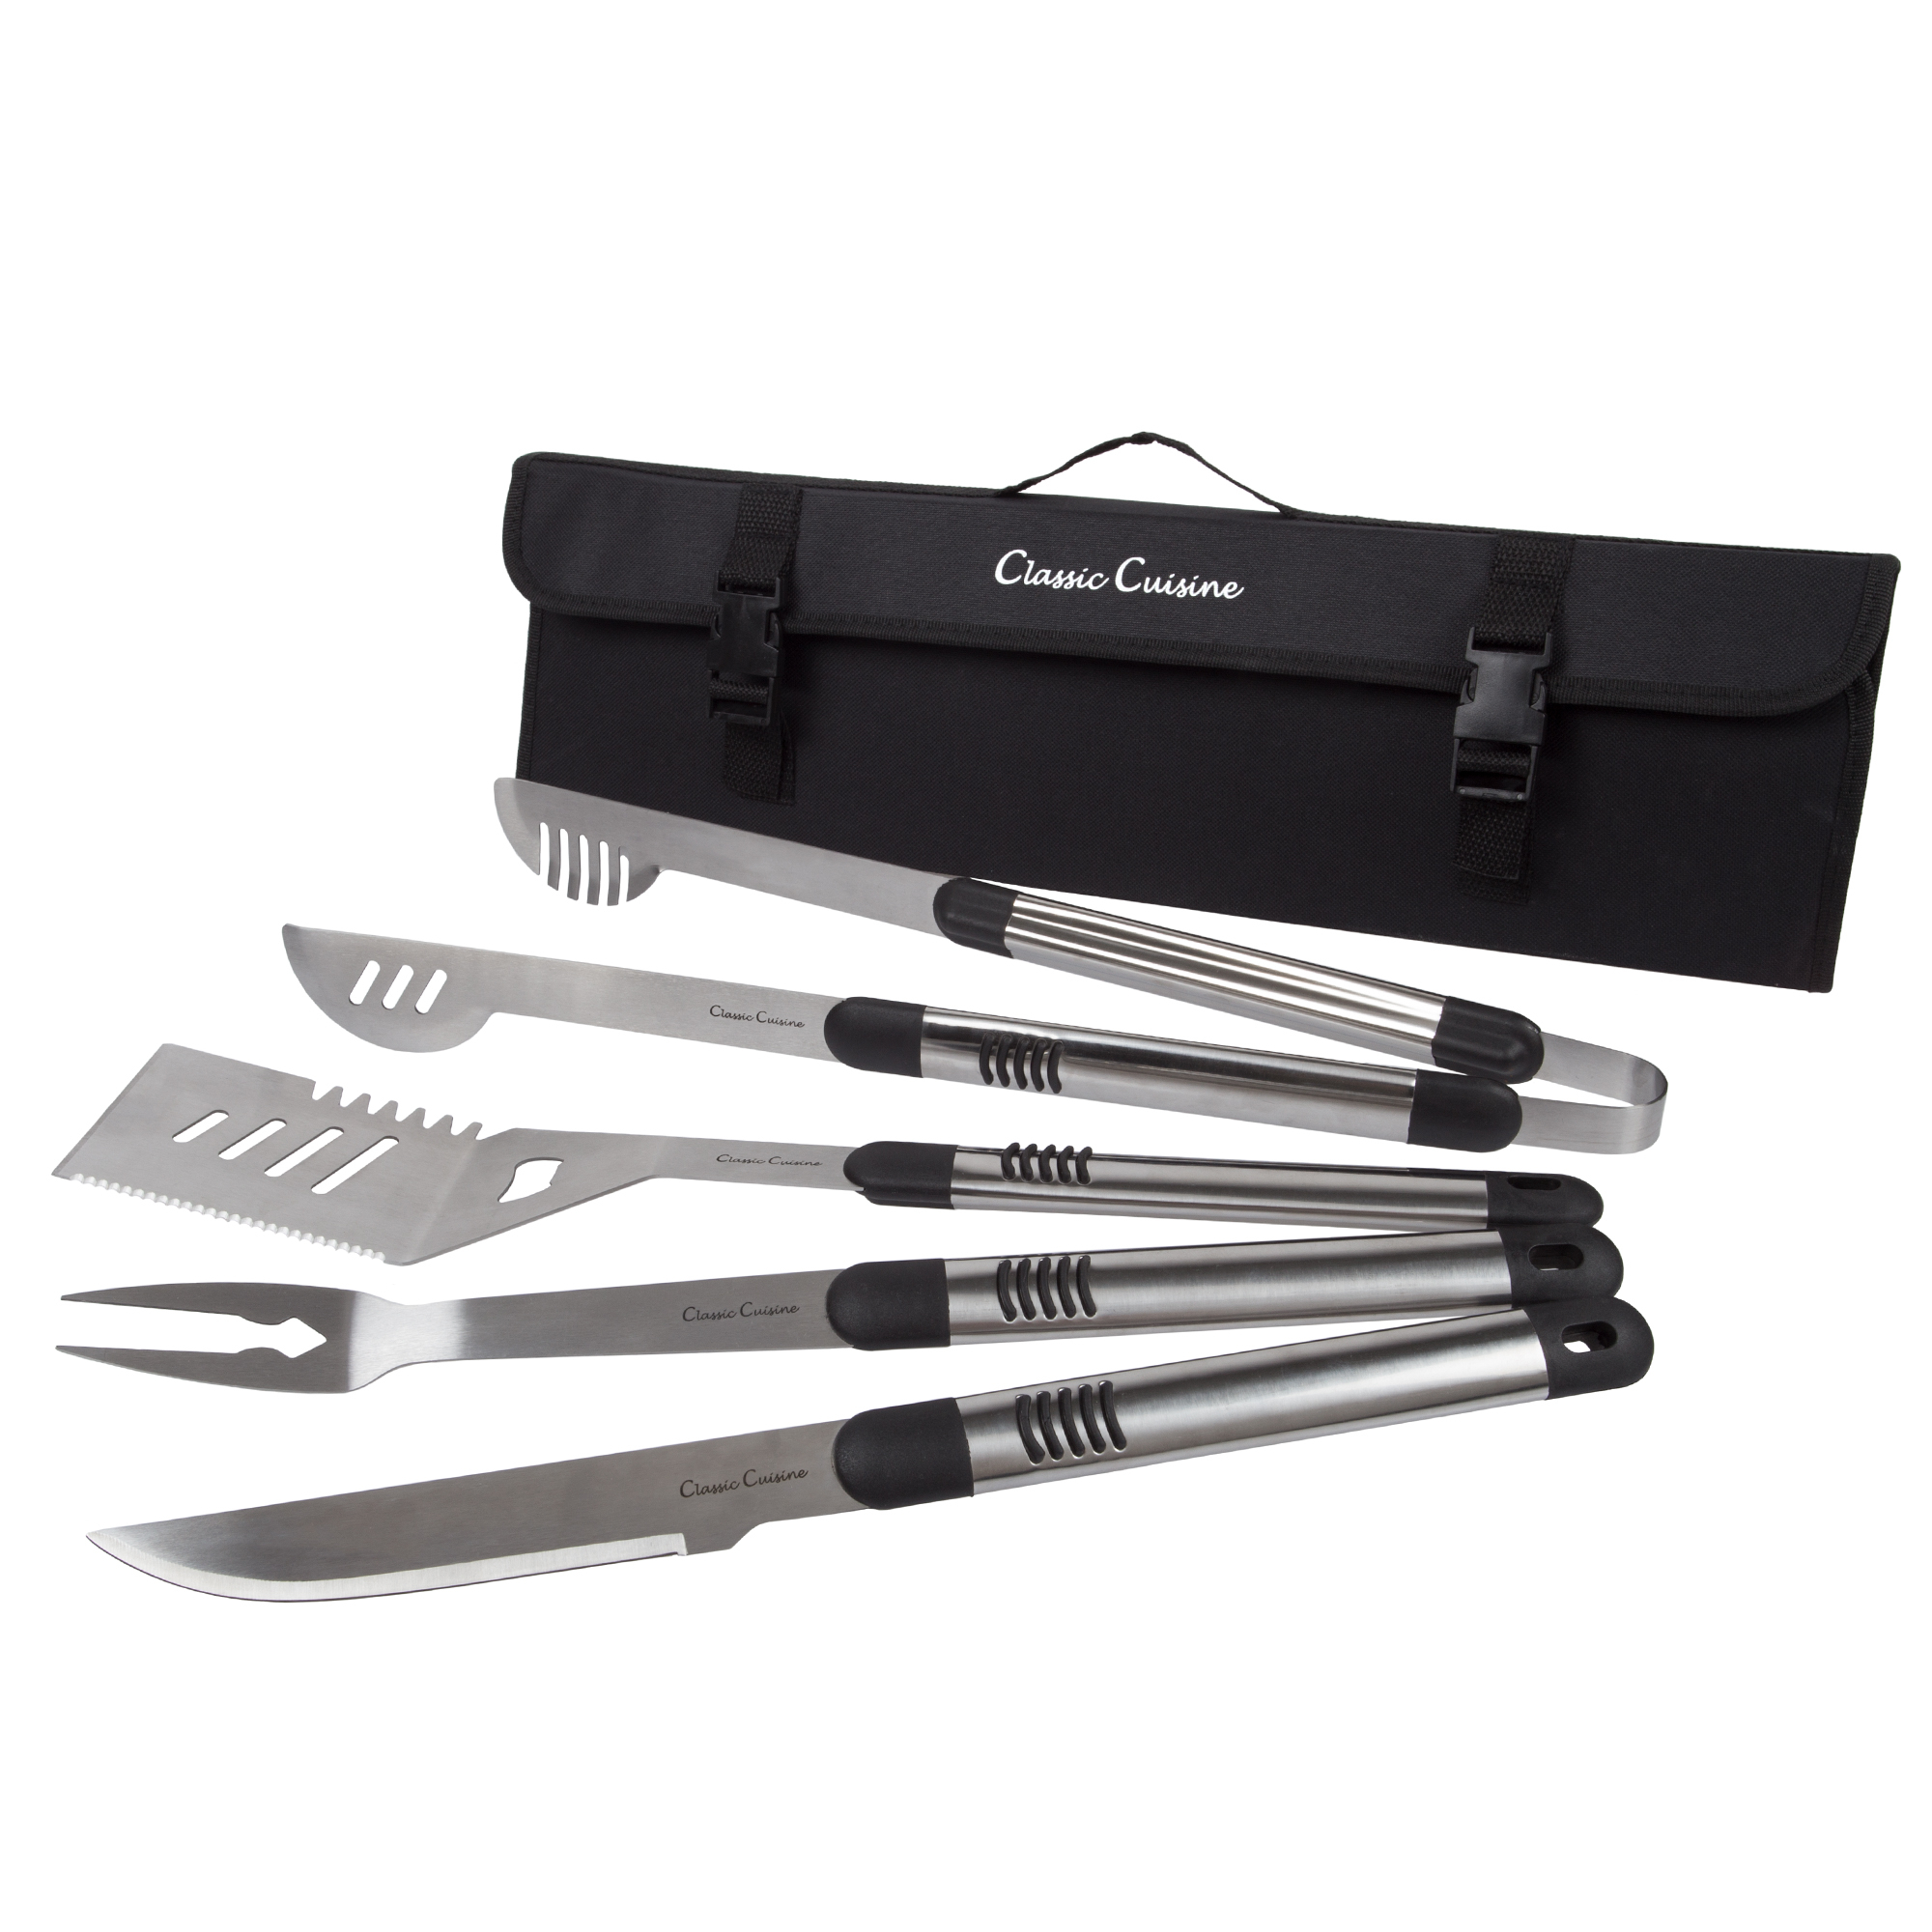 BBQ Grill Tools 5 Piece Stainless Steel Set, Barbecue Grilling Utensils Kit in Heavy Duty Nylon Travel and Storage Roll Bag